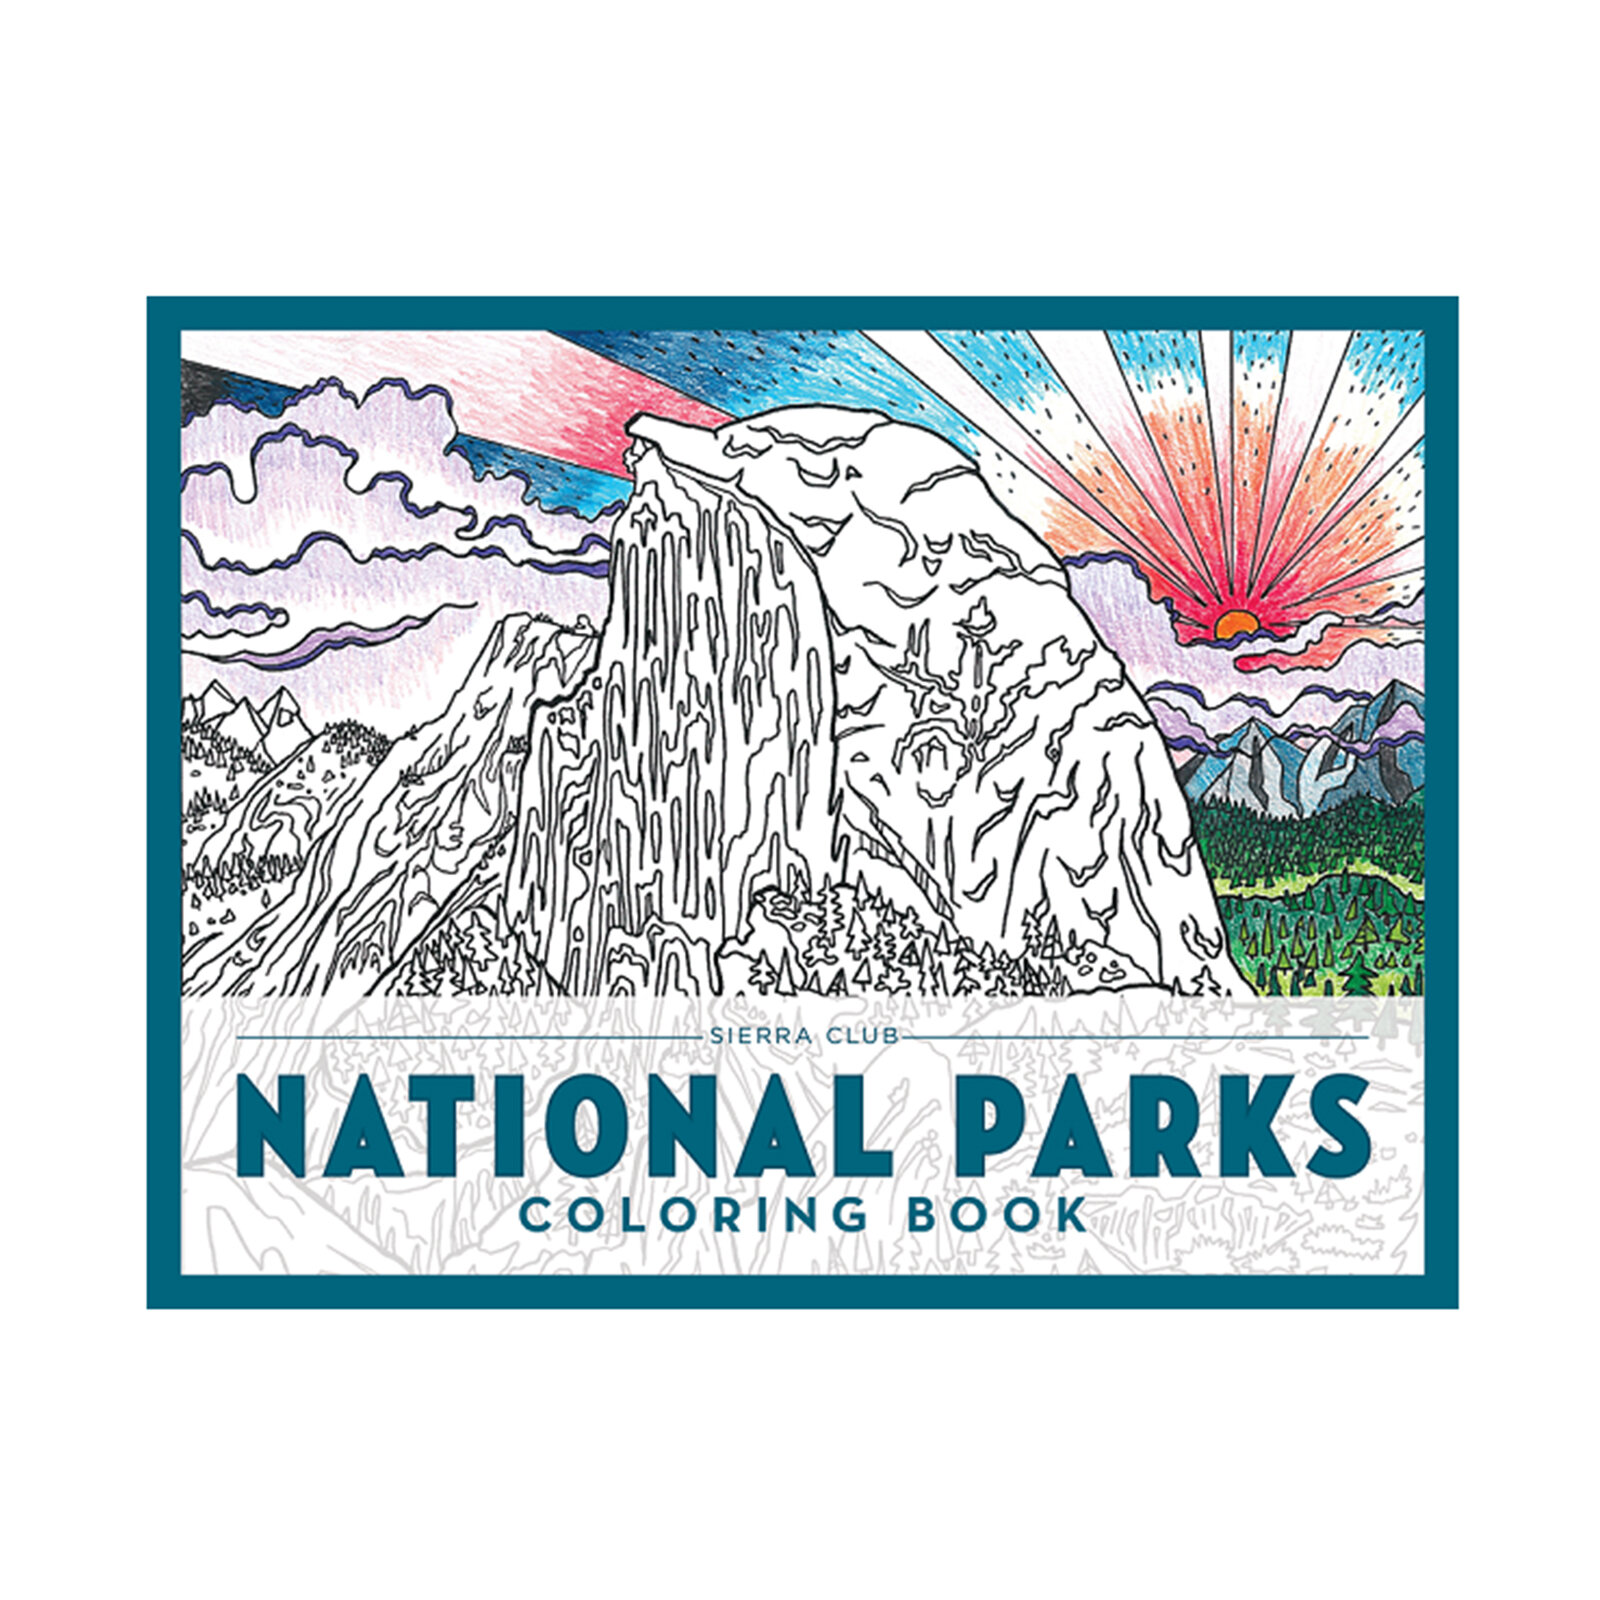 National Parks Coloring Book, Sierra Club, $14.99 